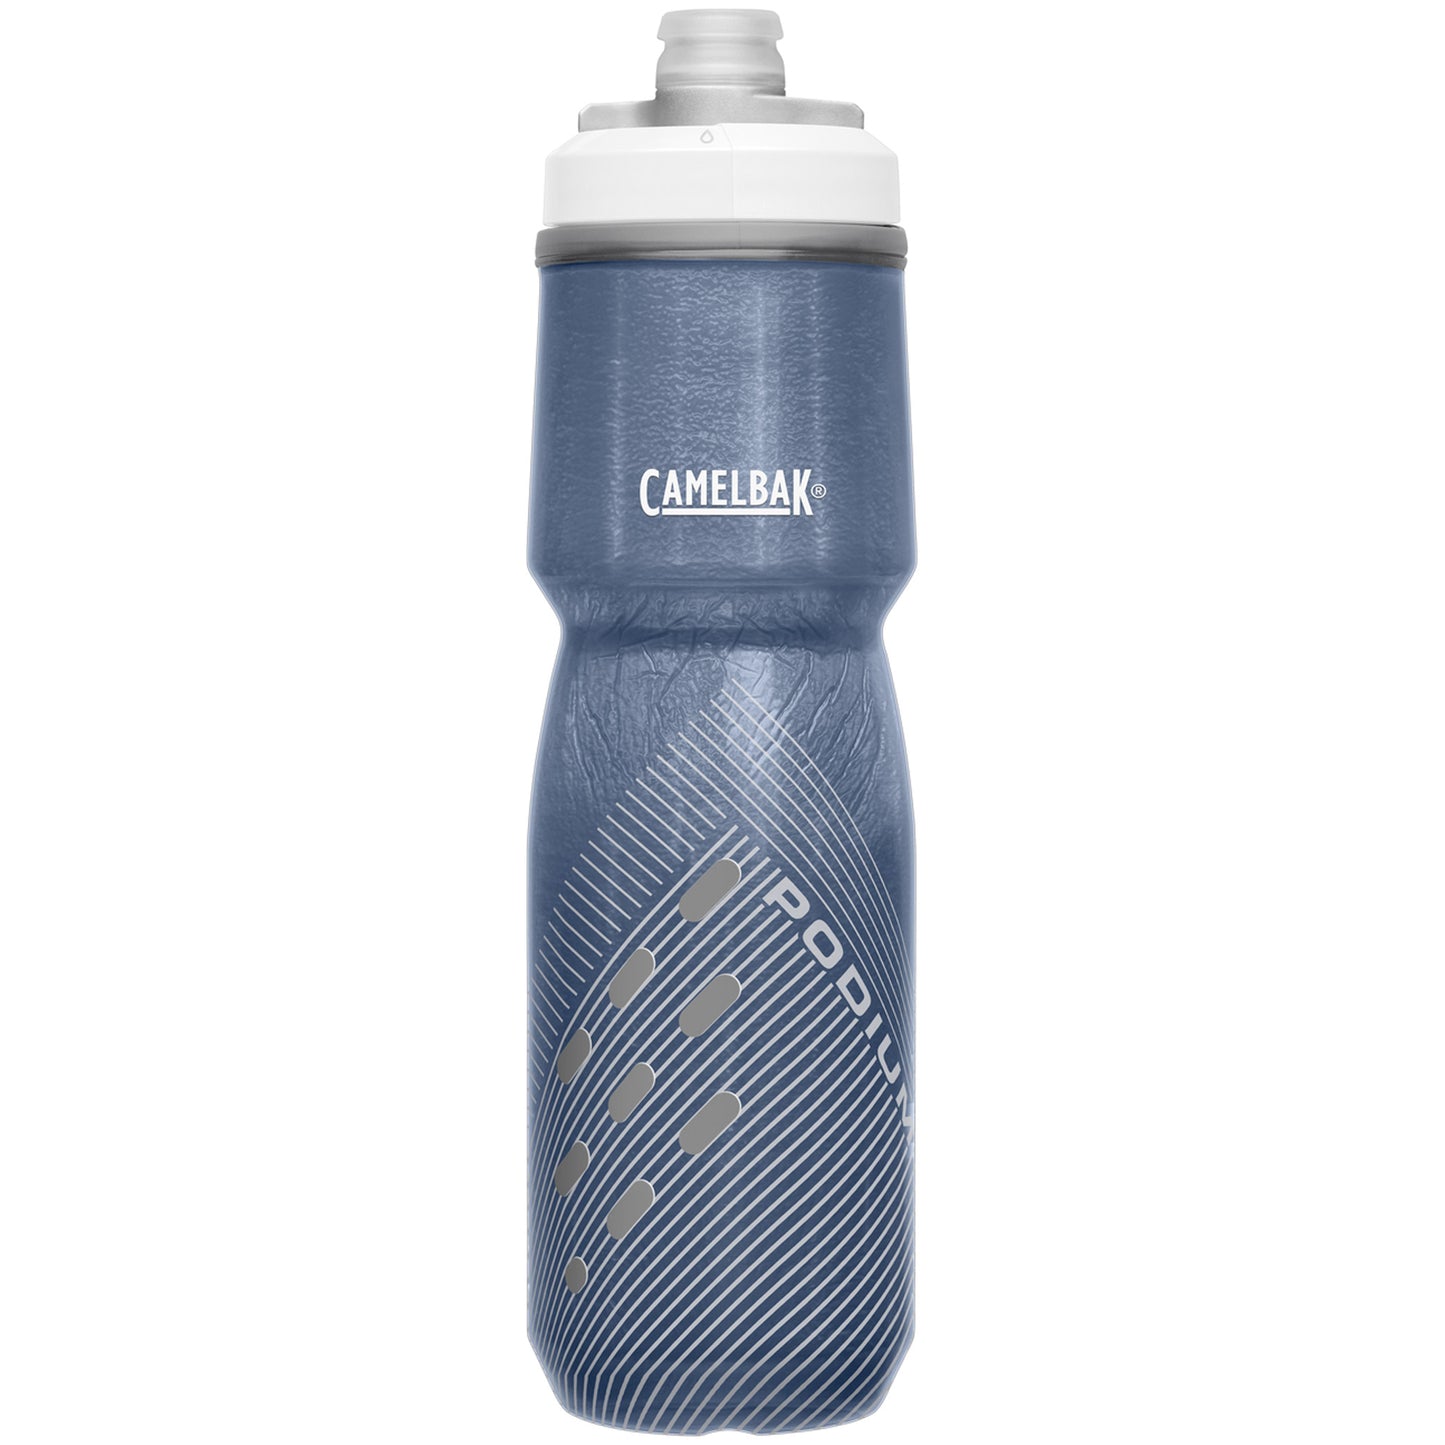 Camelbak Podium Big Chill 700ml, Navy Perforated, buy online at Woolys Wheels